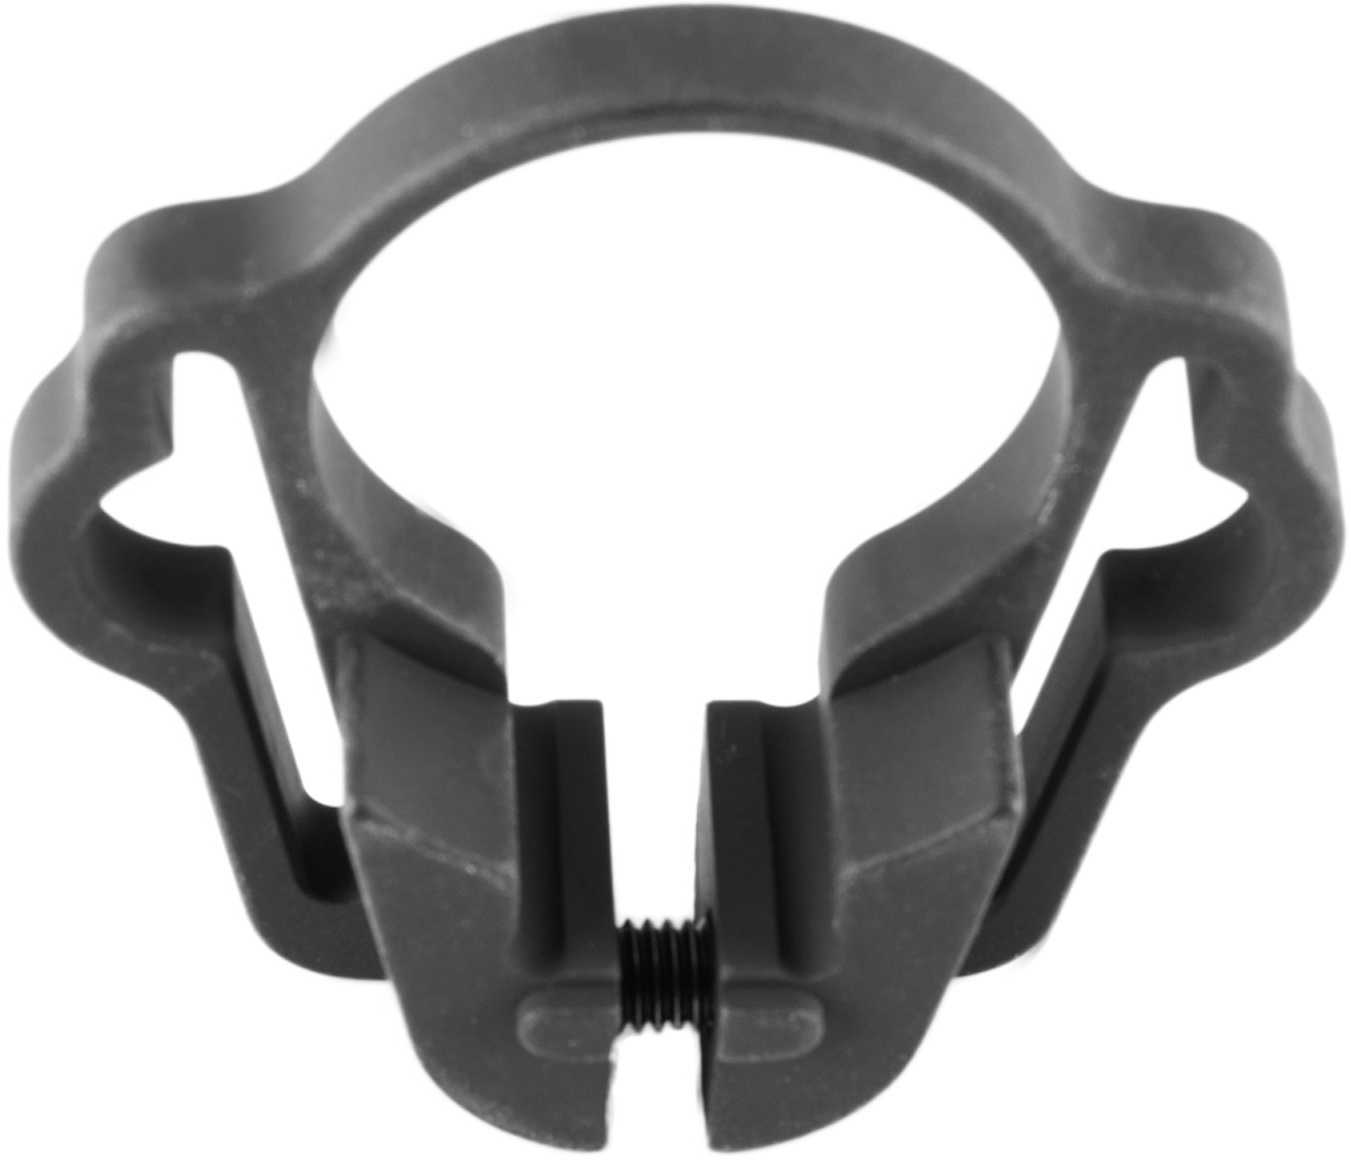 Mission First Tactical OPSM Sling Mount AR-15 1.25" Aluminum 2.11" x 2.1" x 0.67"